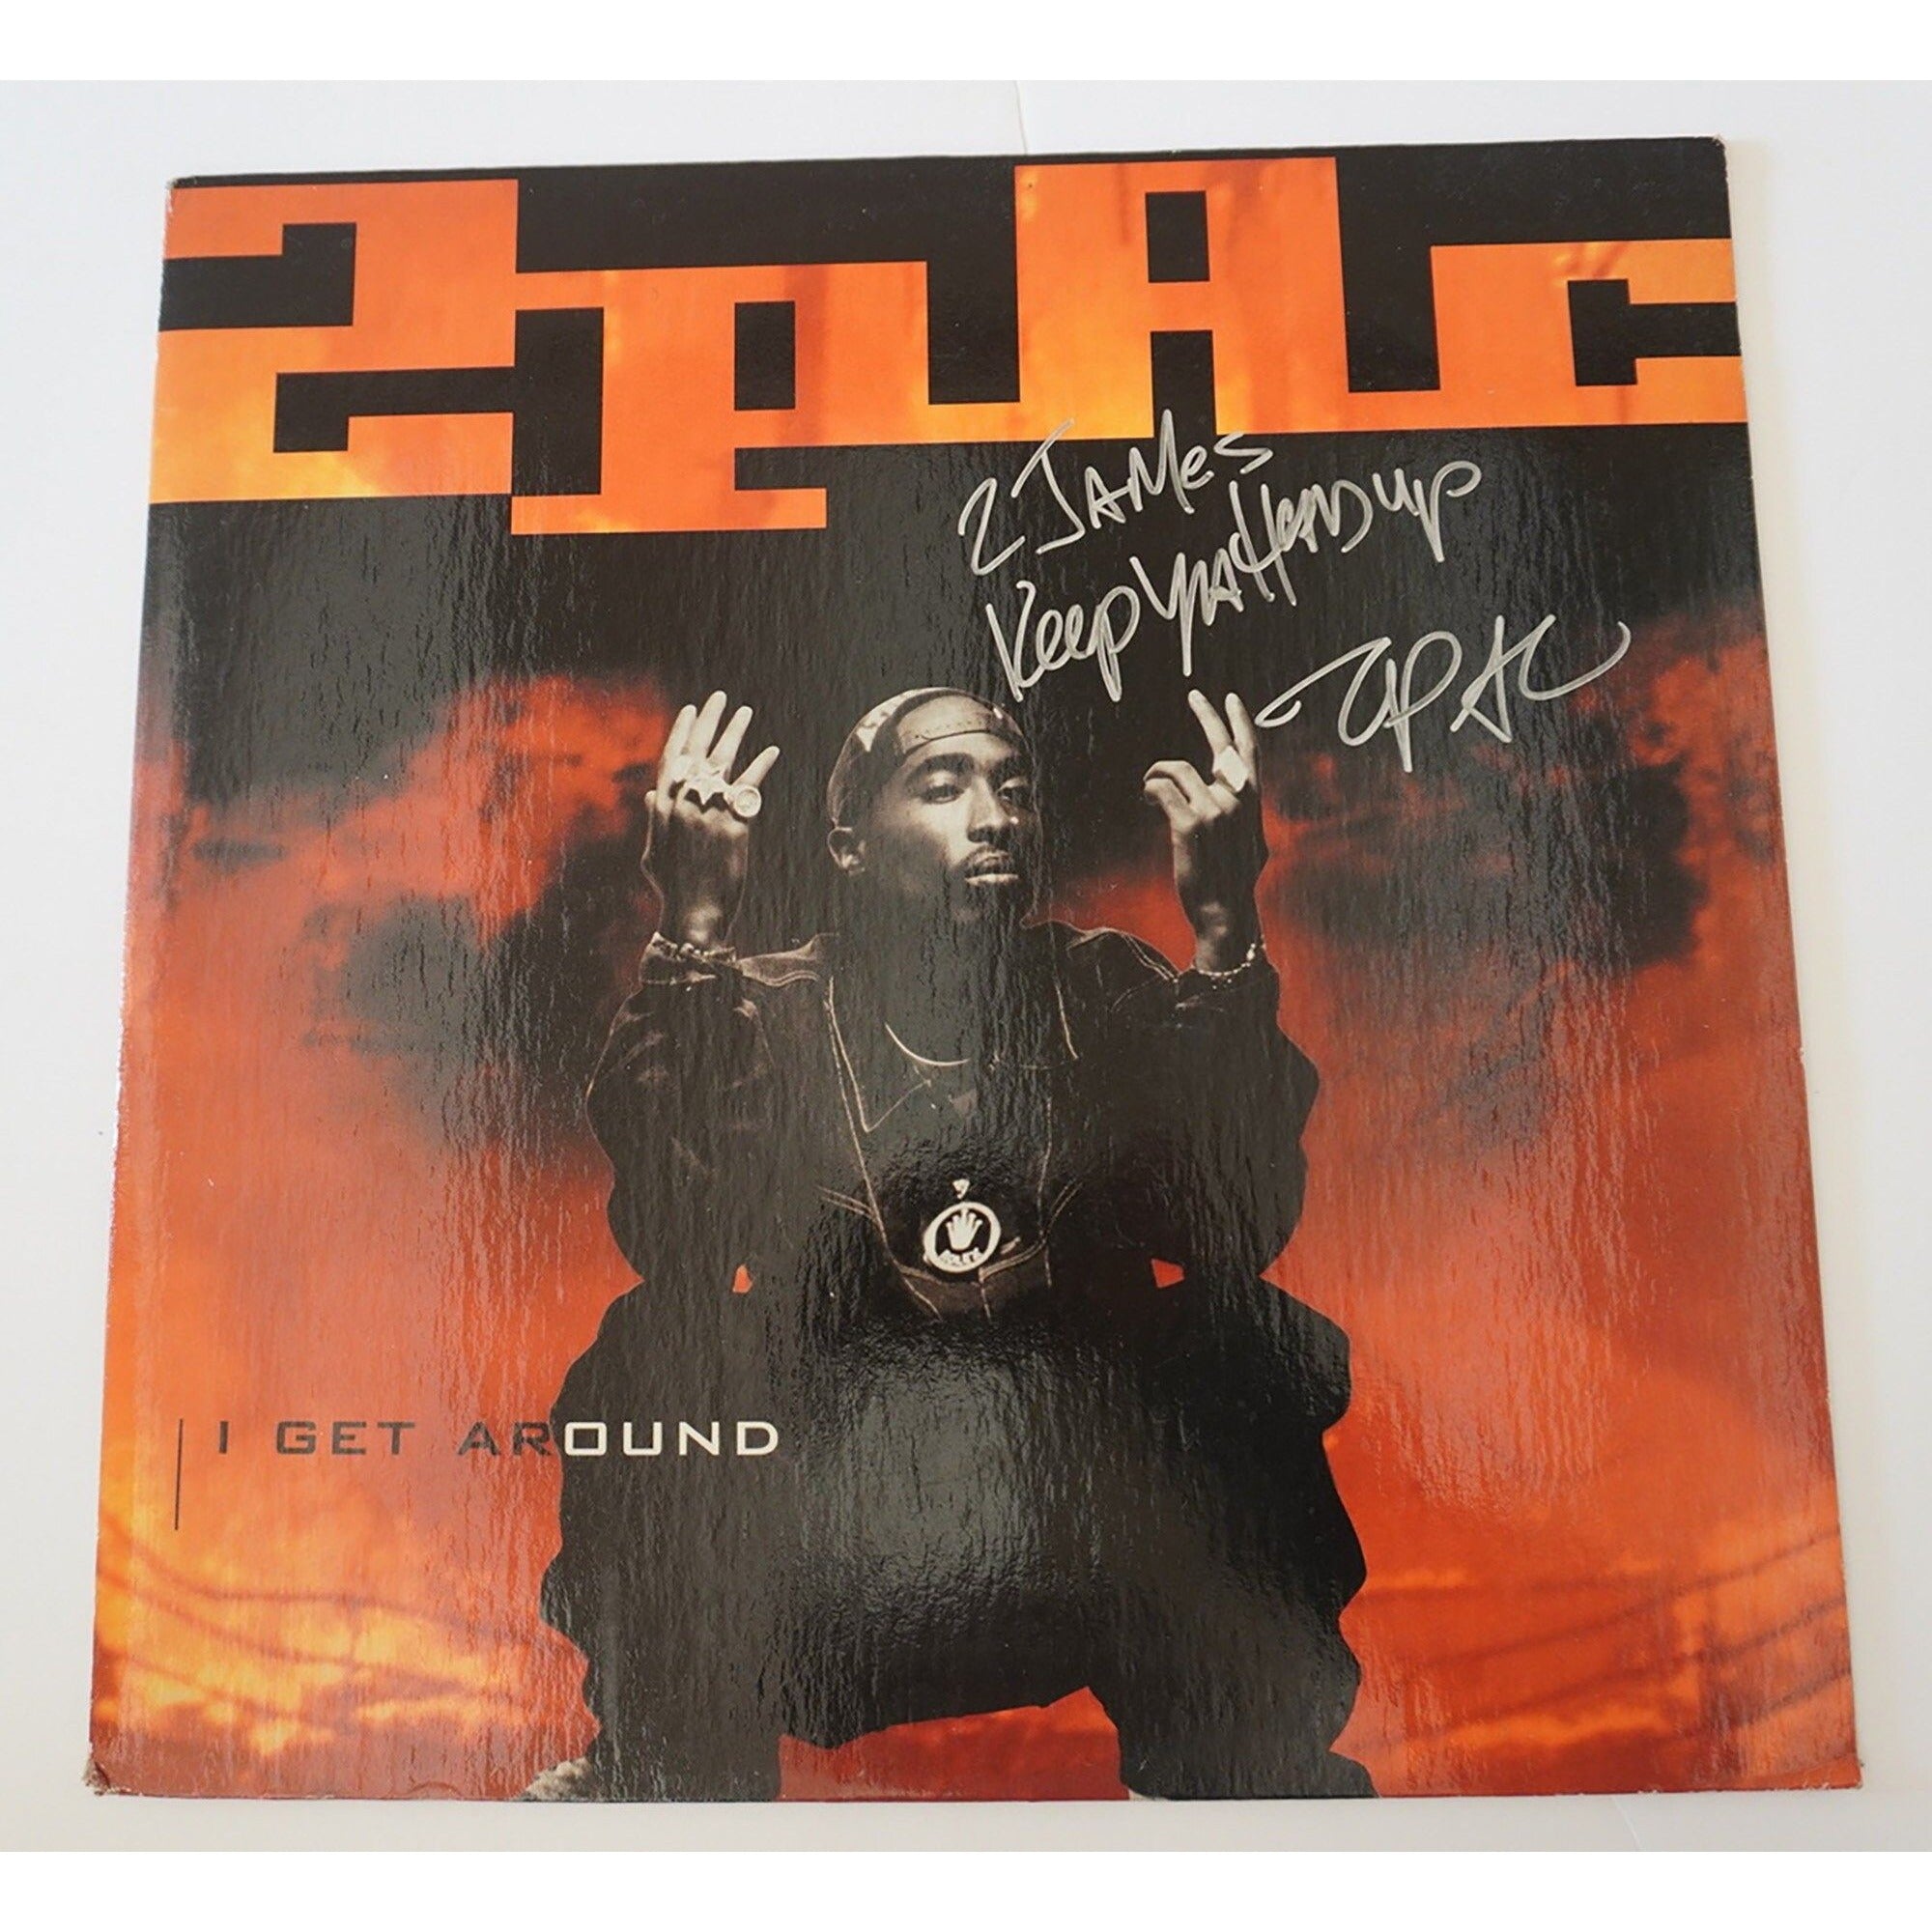 Tupac Shakur "I get around" LP signed 1993 with proof